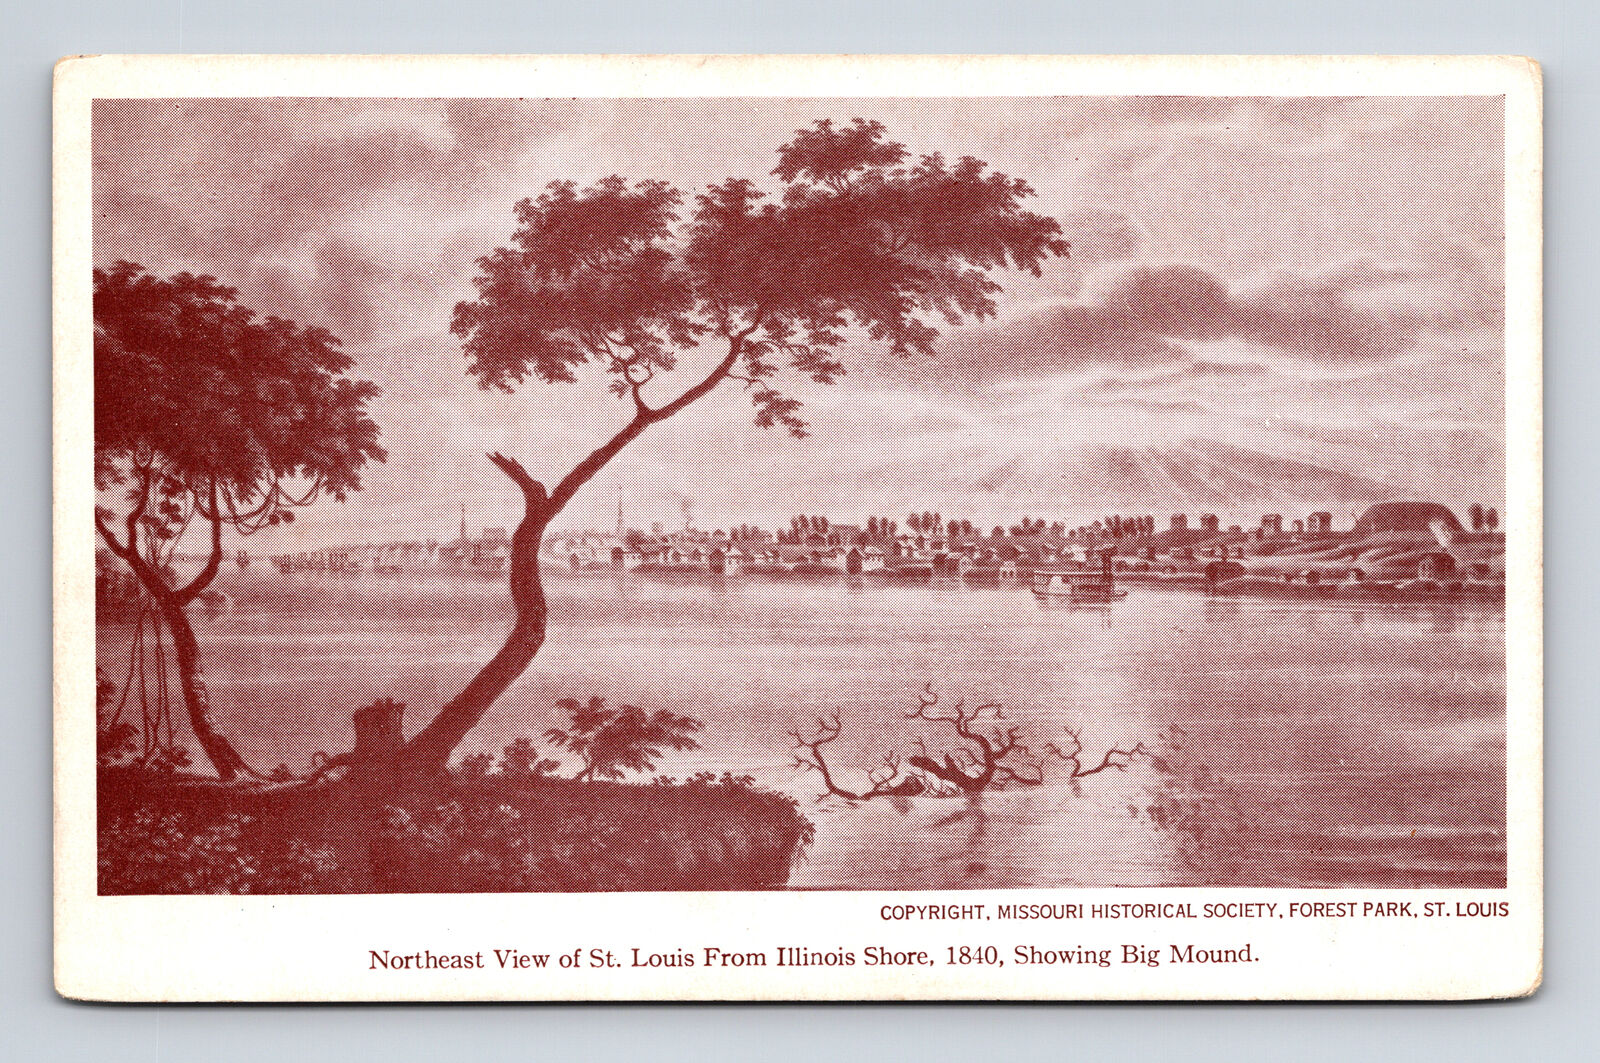 Big Mound Native American From IL Shore 1840 Bloody Island St Louis MO Postcard